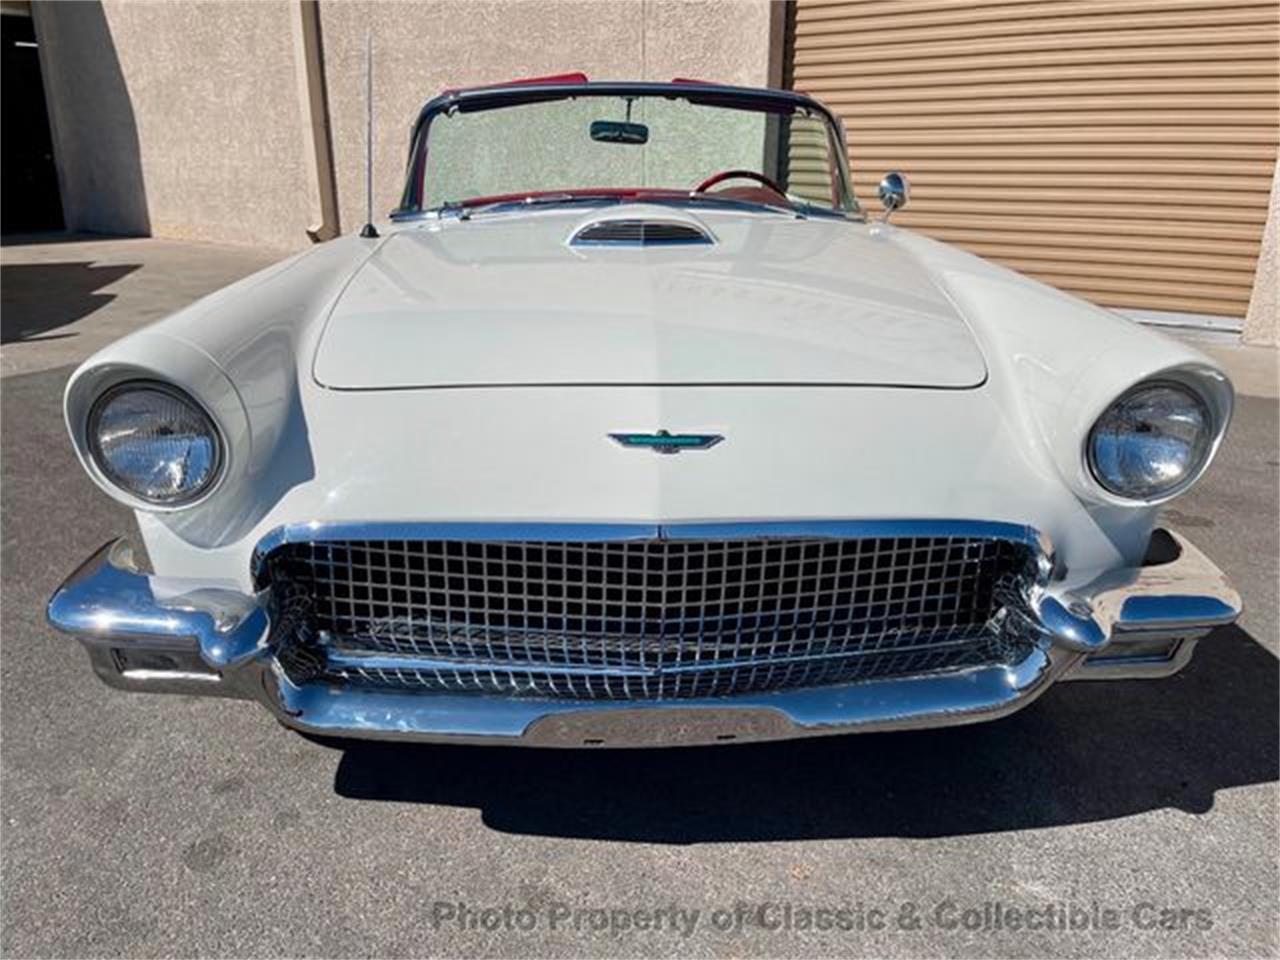 1957 Ford Thunderbird for sale in Las Vegas, NV – photo 2